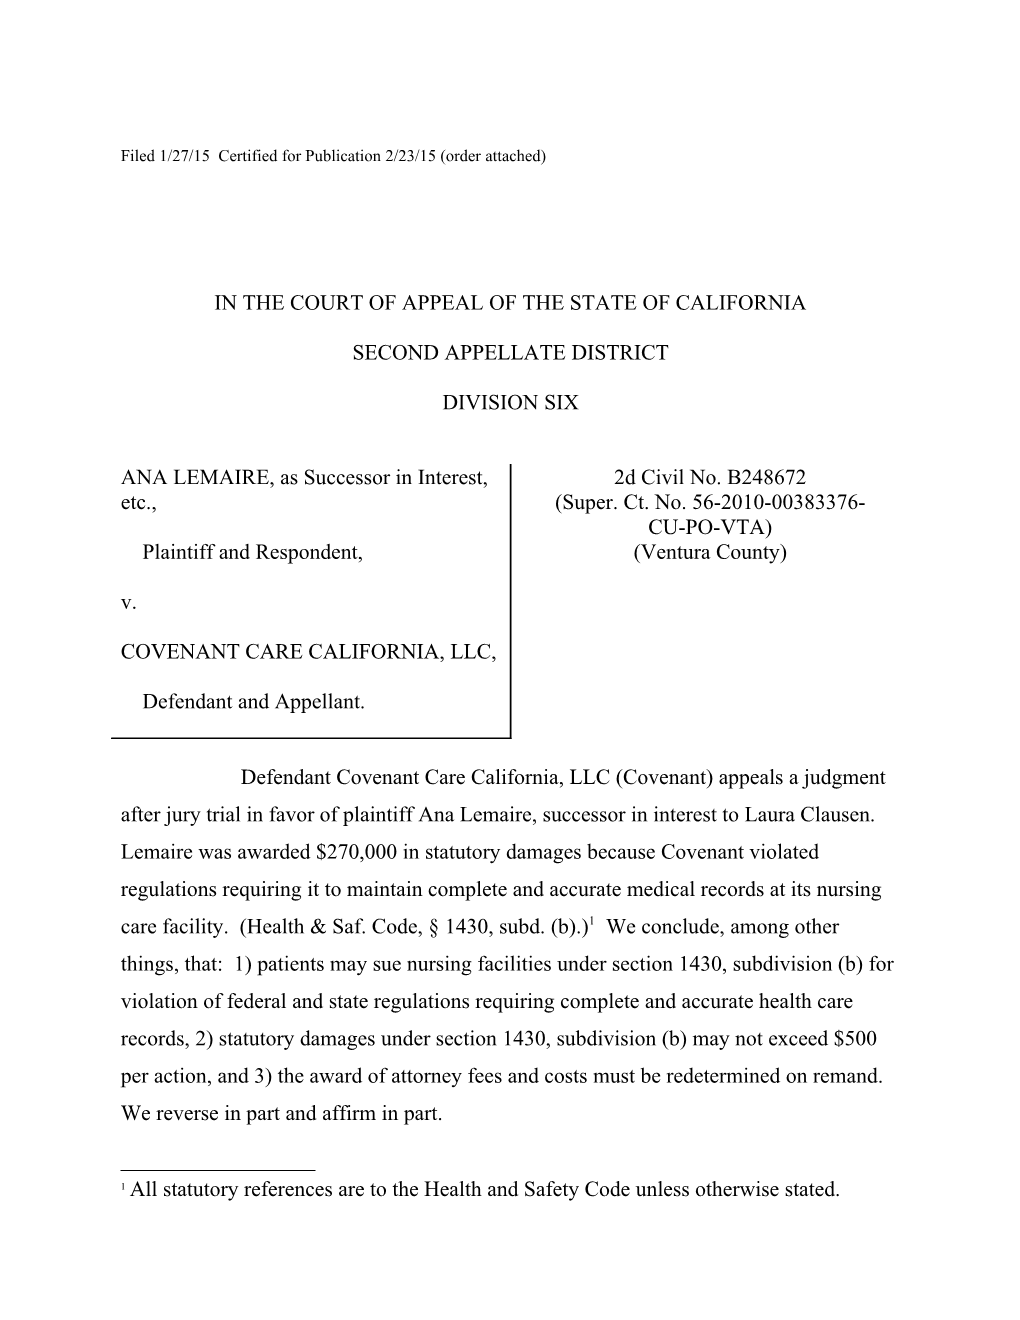 Filed 1/27/15 Certified for Publication 2/23/15 (Order Attached)